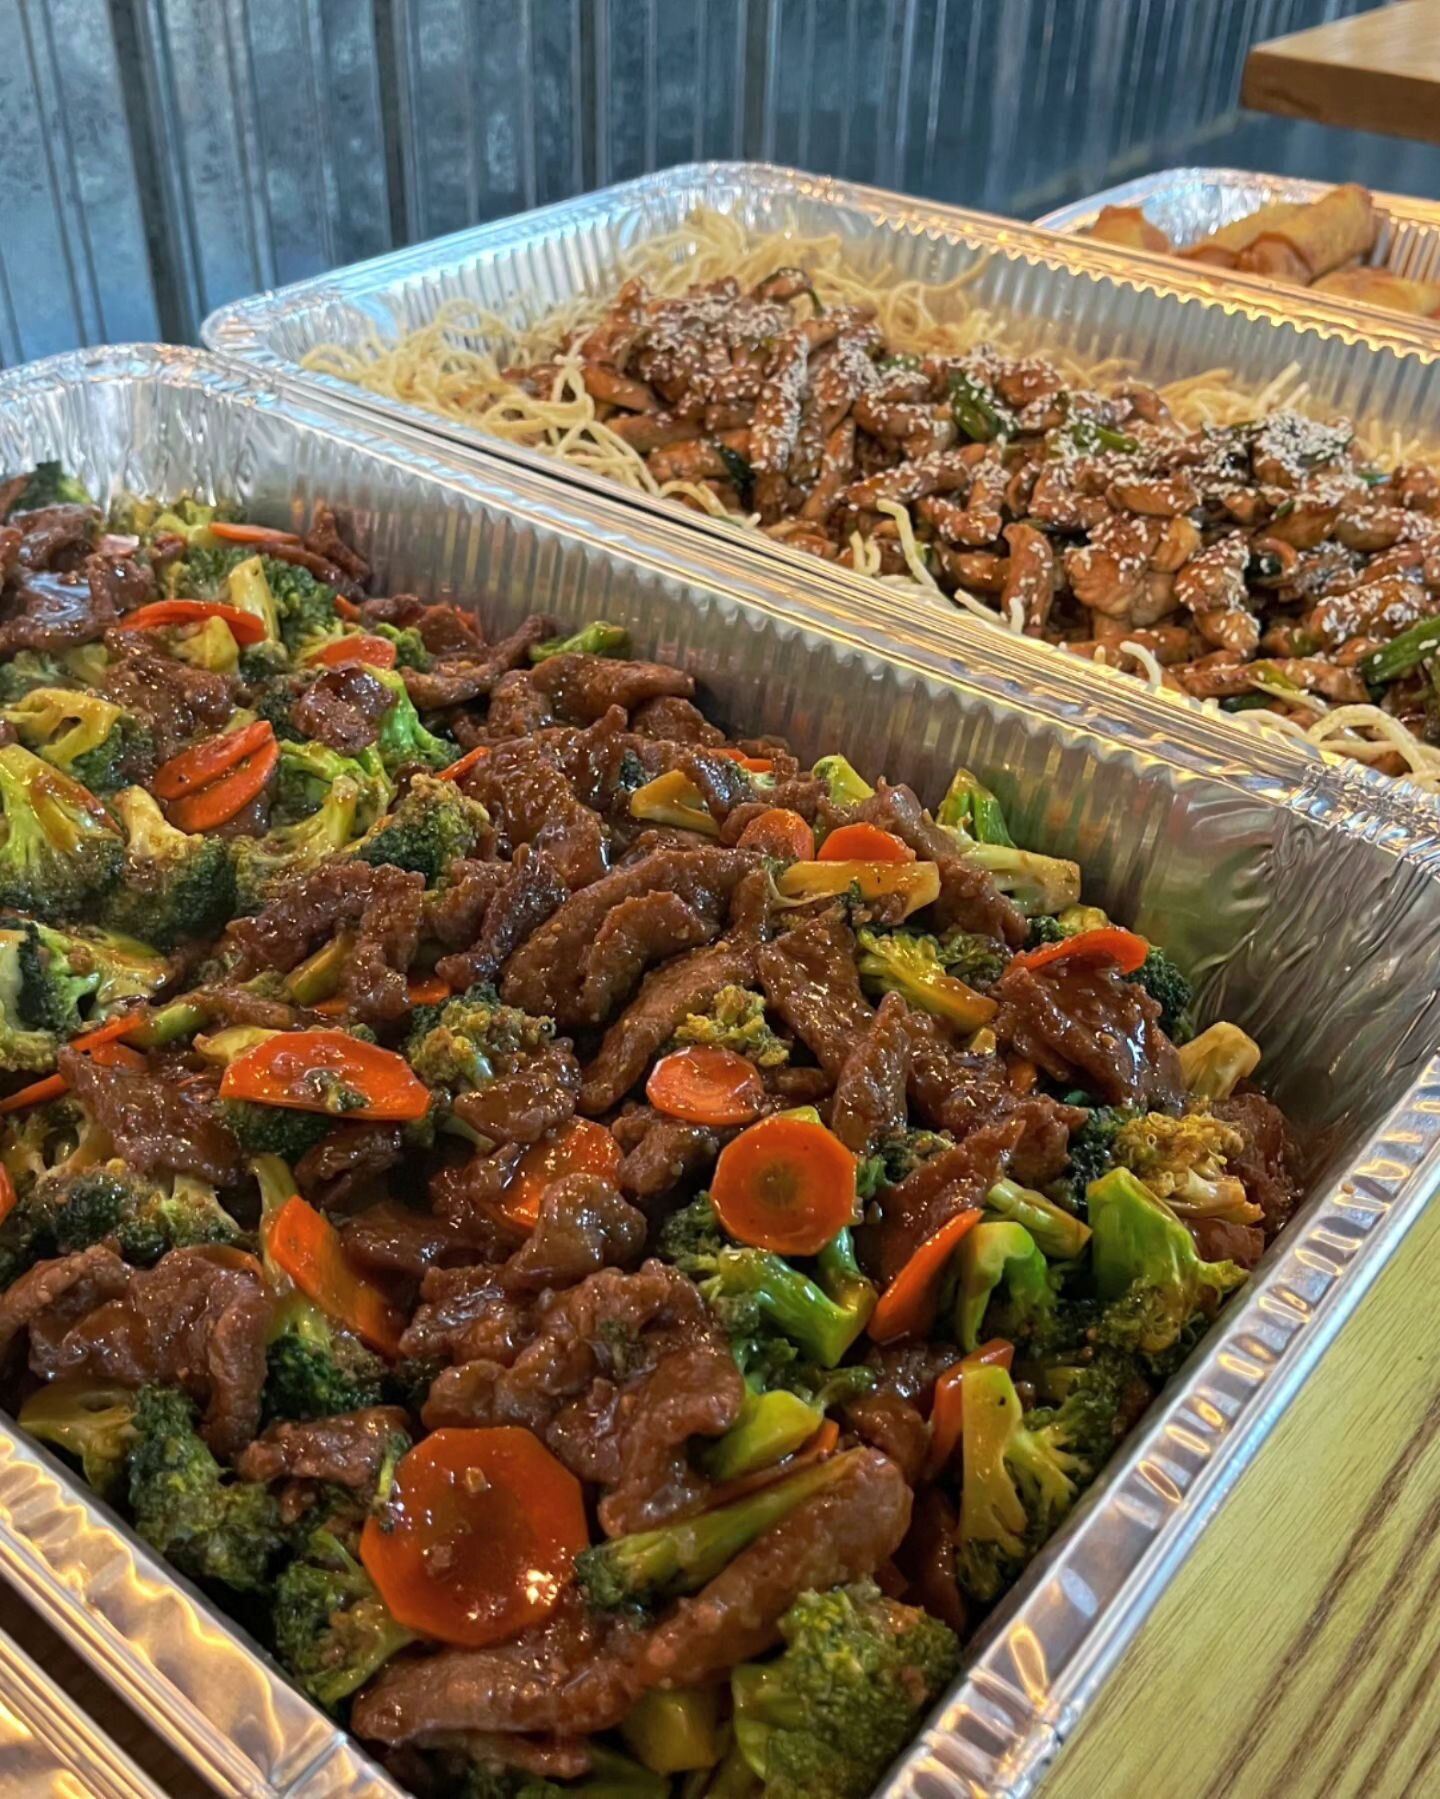 With all the holiday parties coming up and family coming into town, we're your perfect choice!

Just get a whole tray of lo mein for everyone to share! 

#portlandtxeats #portlandtx #thericehat #thericehattx